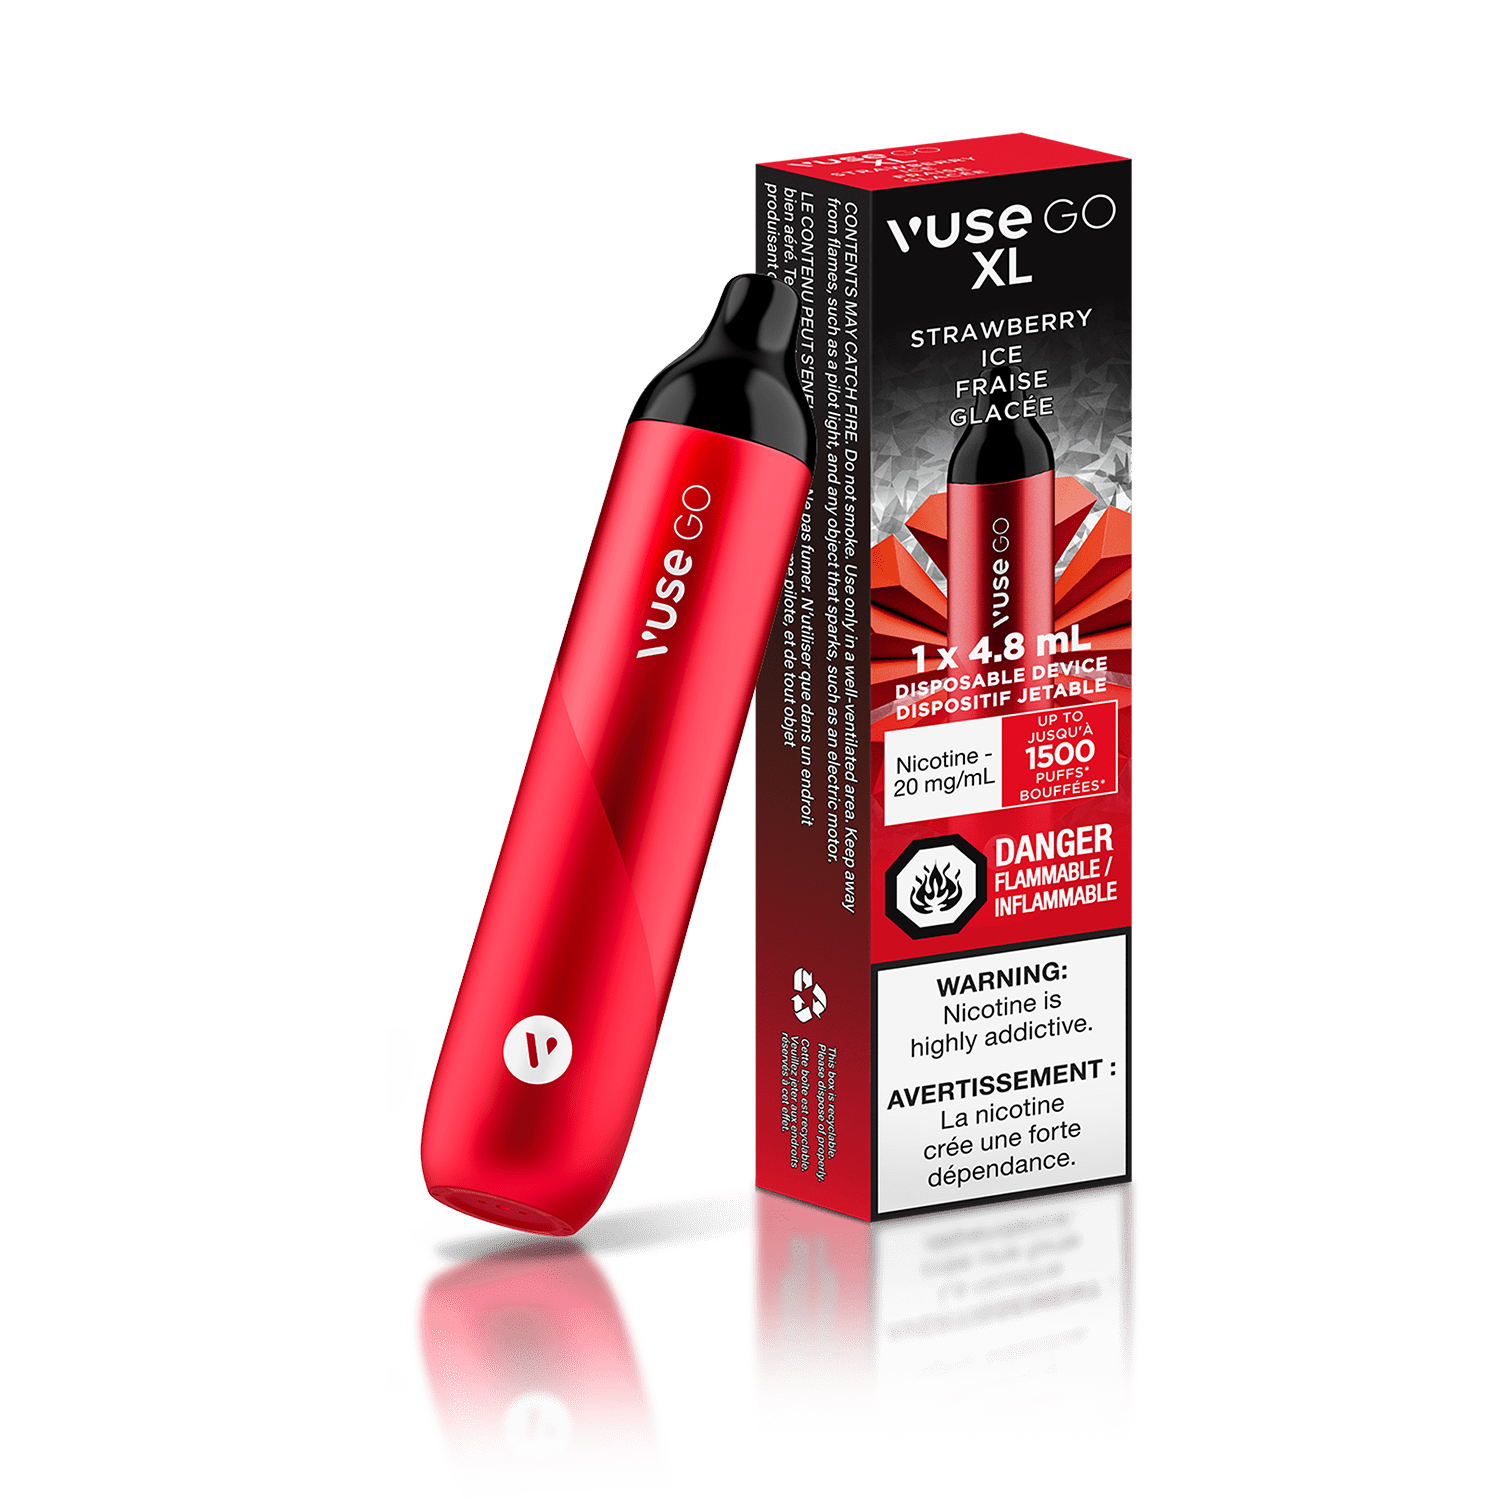 Vuse GO XL Disposable Vape - Strawberry Ice available on Canada online vape shop